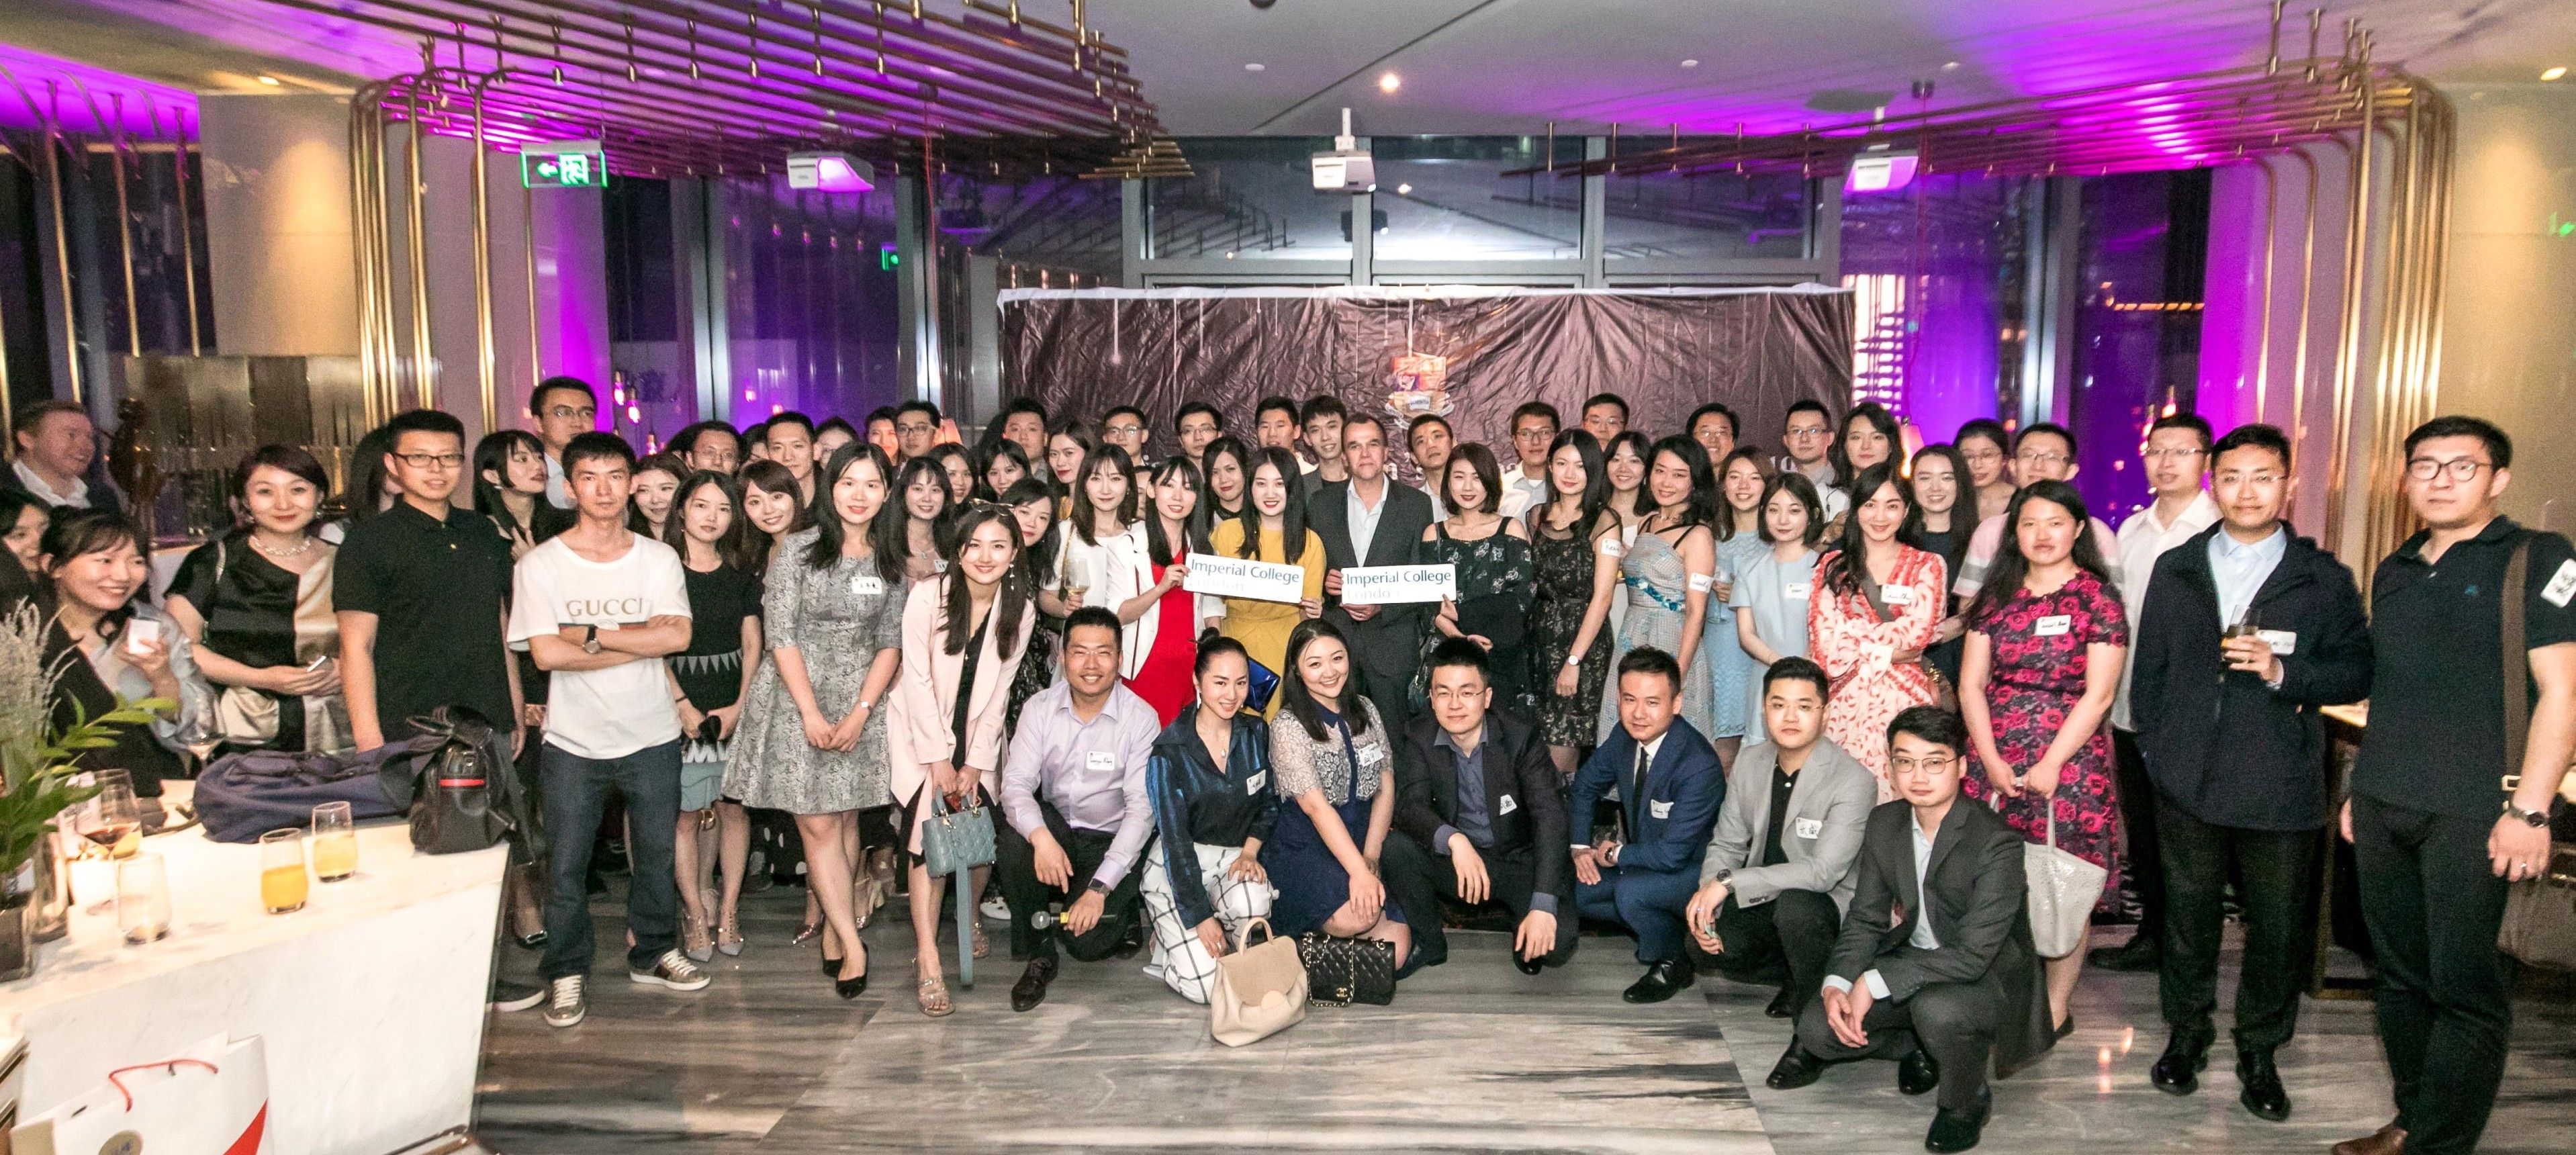 A visit from Professor Martin Siegert to Beijing was a chance for recent graduates to network 